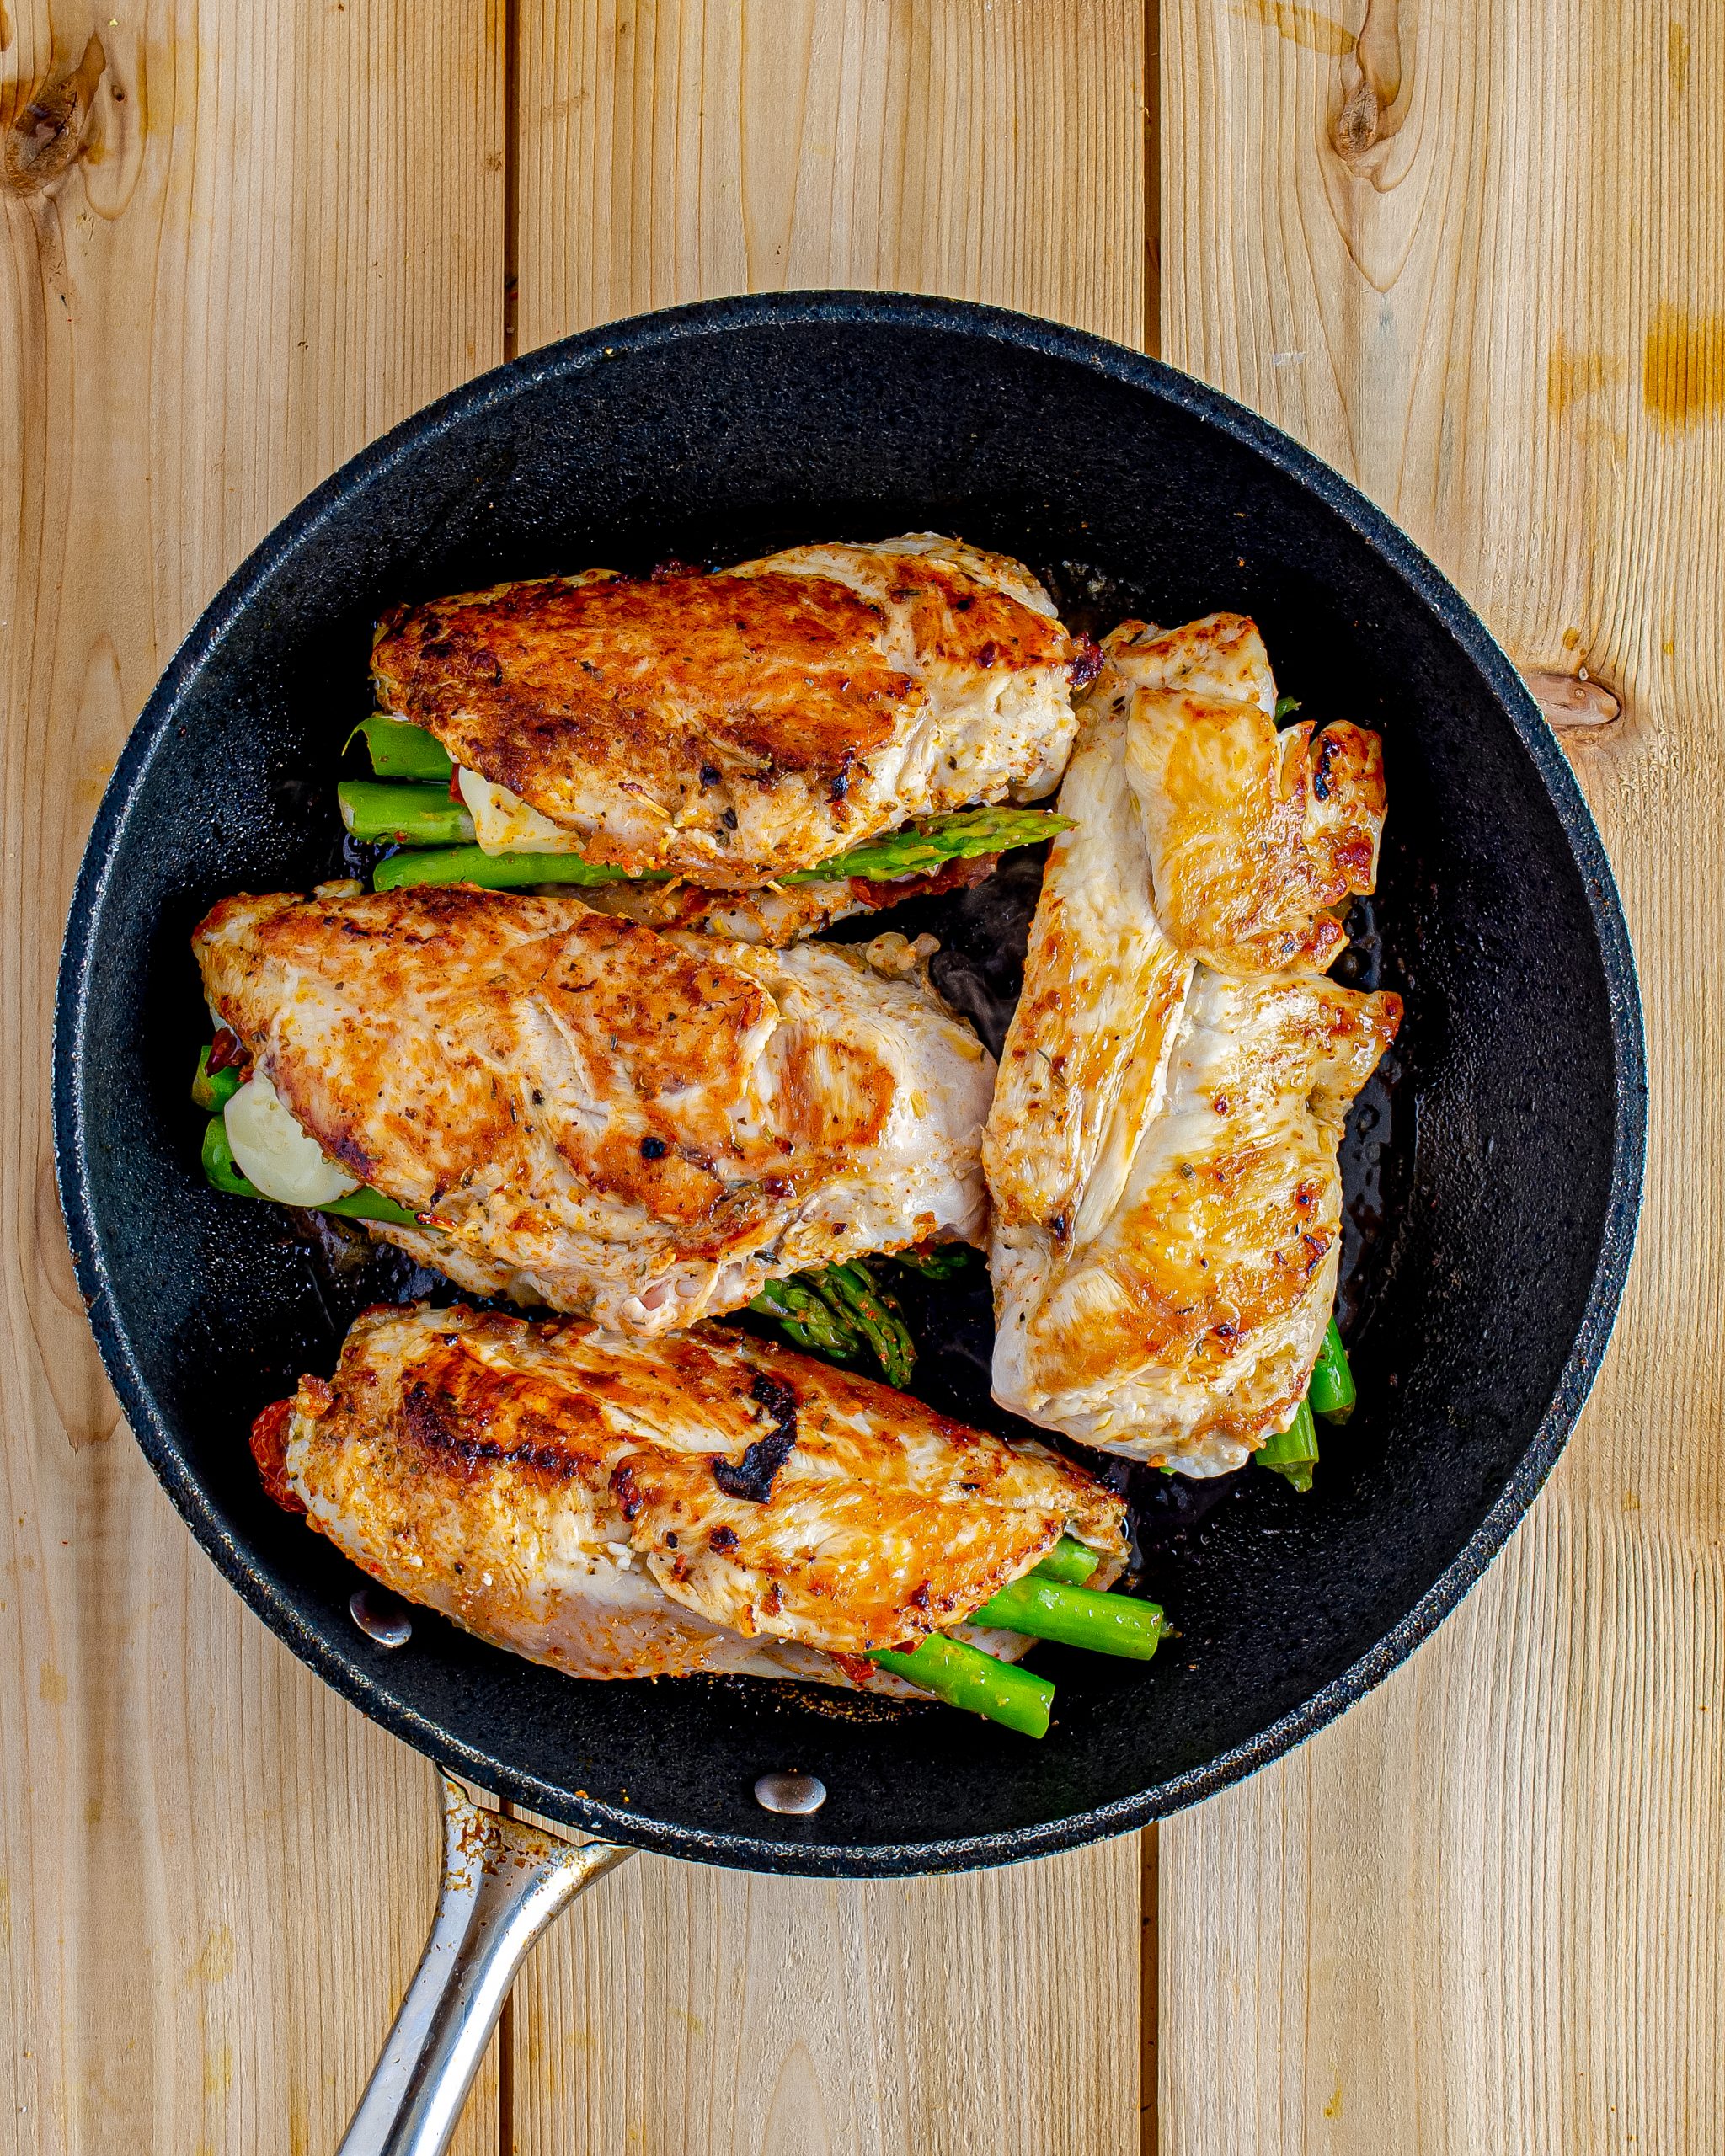 Sear the chicken for 5 minutes per side.